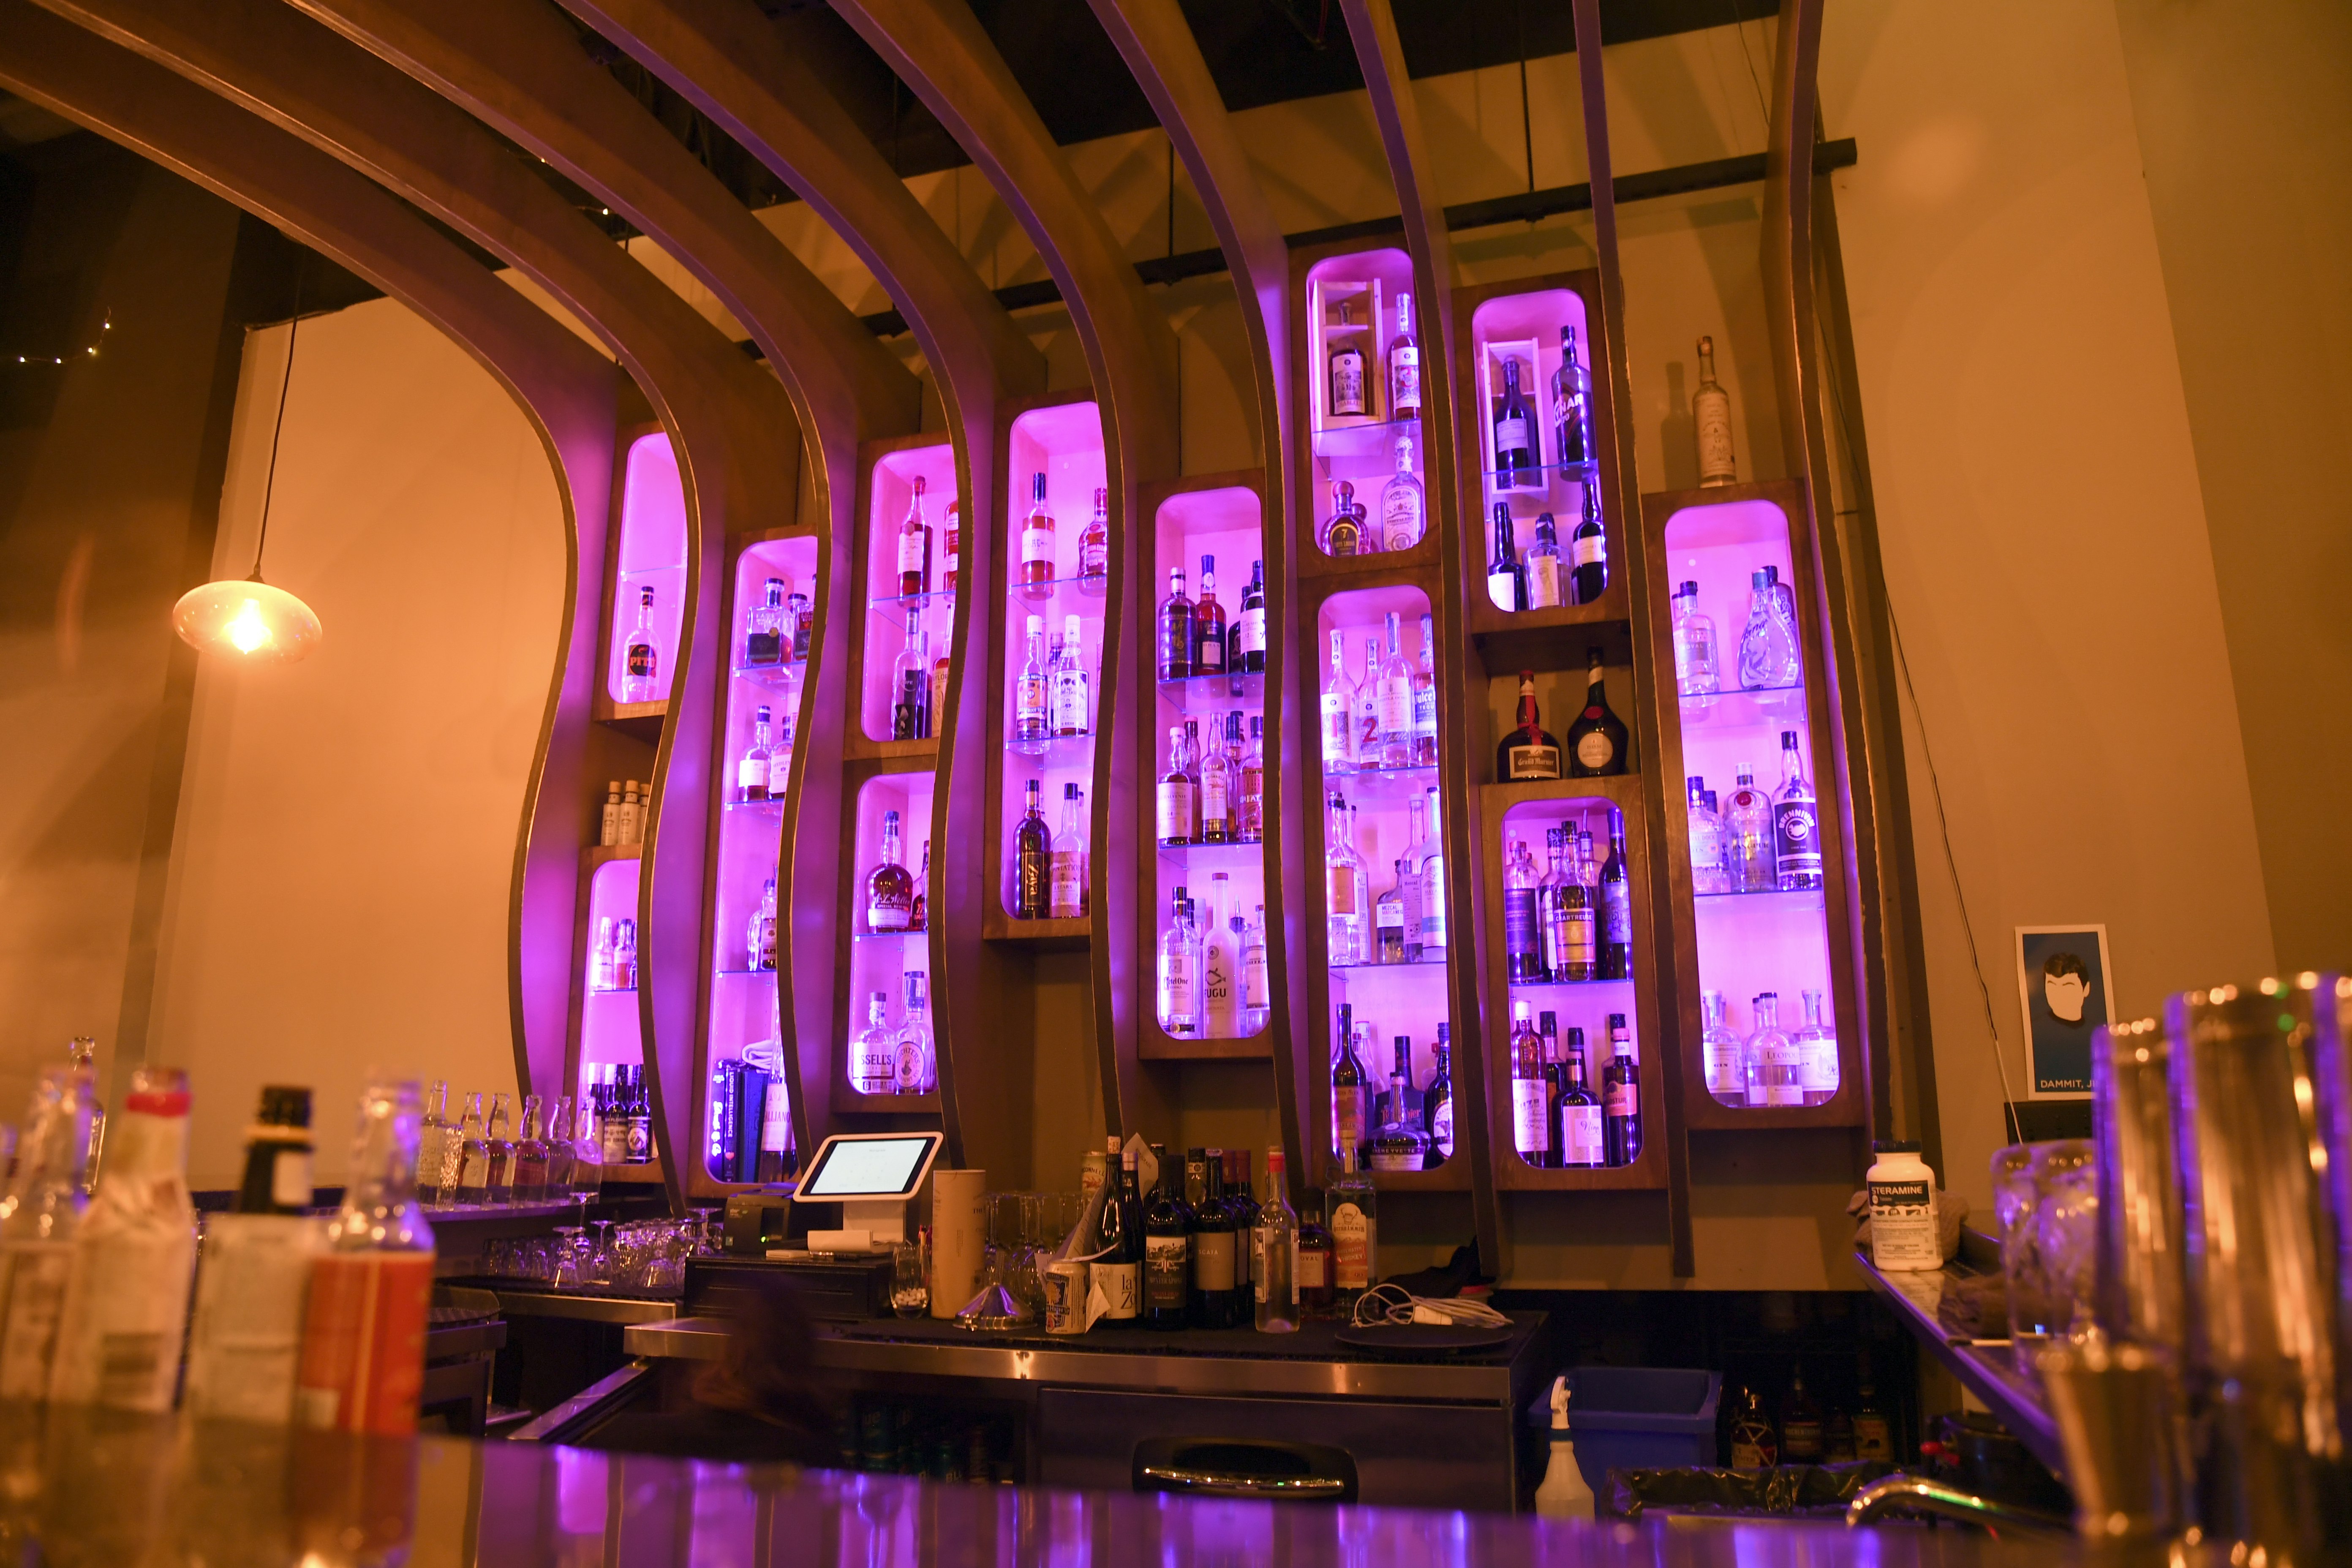 Bottles of liquor are displayed in purple glowing shelves divided by curved wooden ribs, a contemporary take on Midcentury Modern aesthetic forms